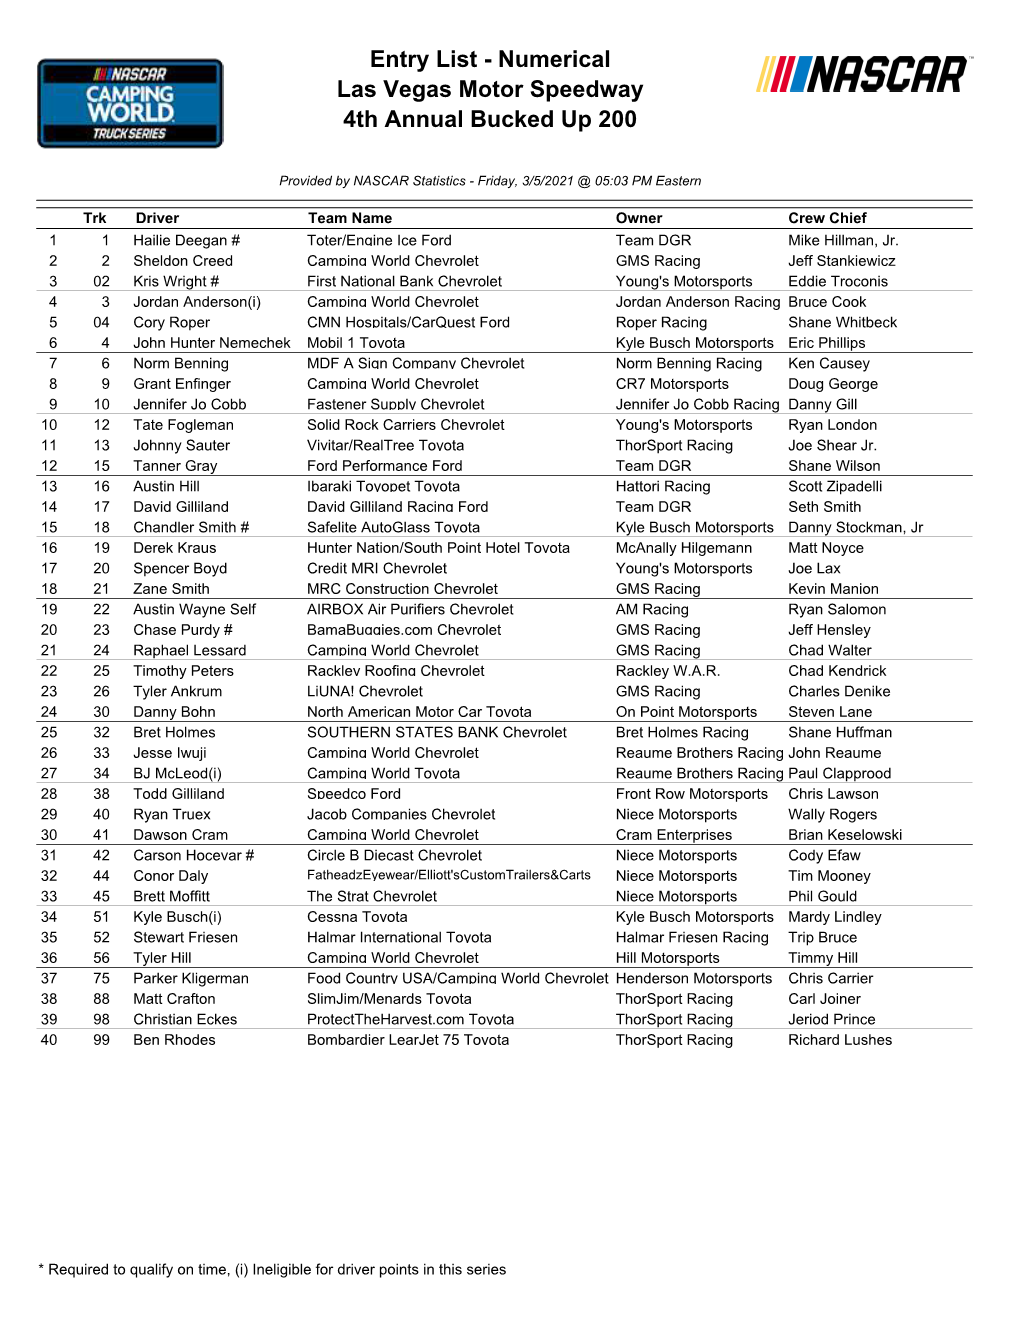 Entry List - Numerical Las Vegas Motor Speedway 4Th Annual Bucked up 200